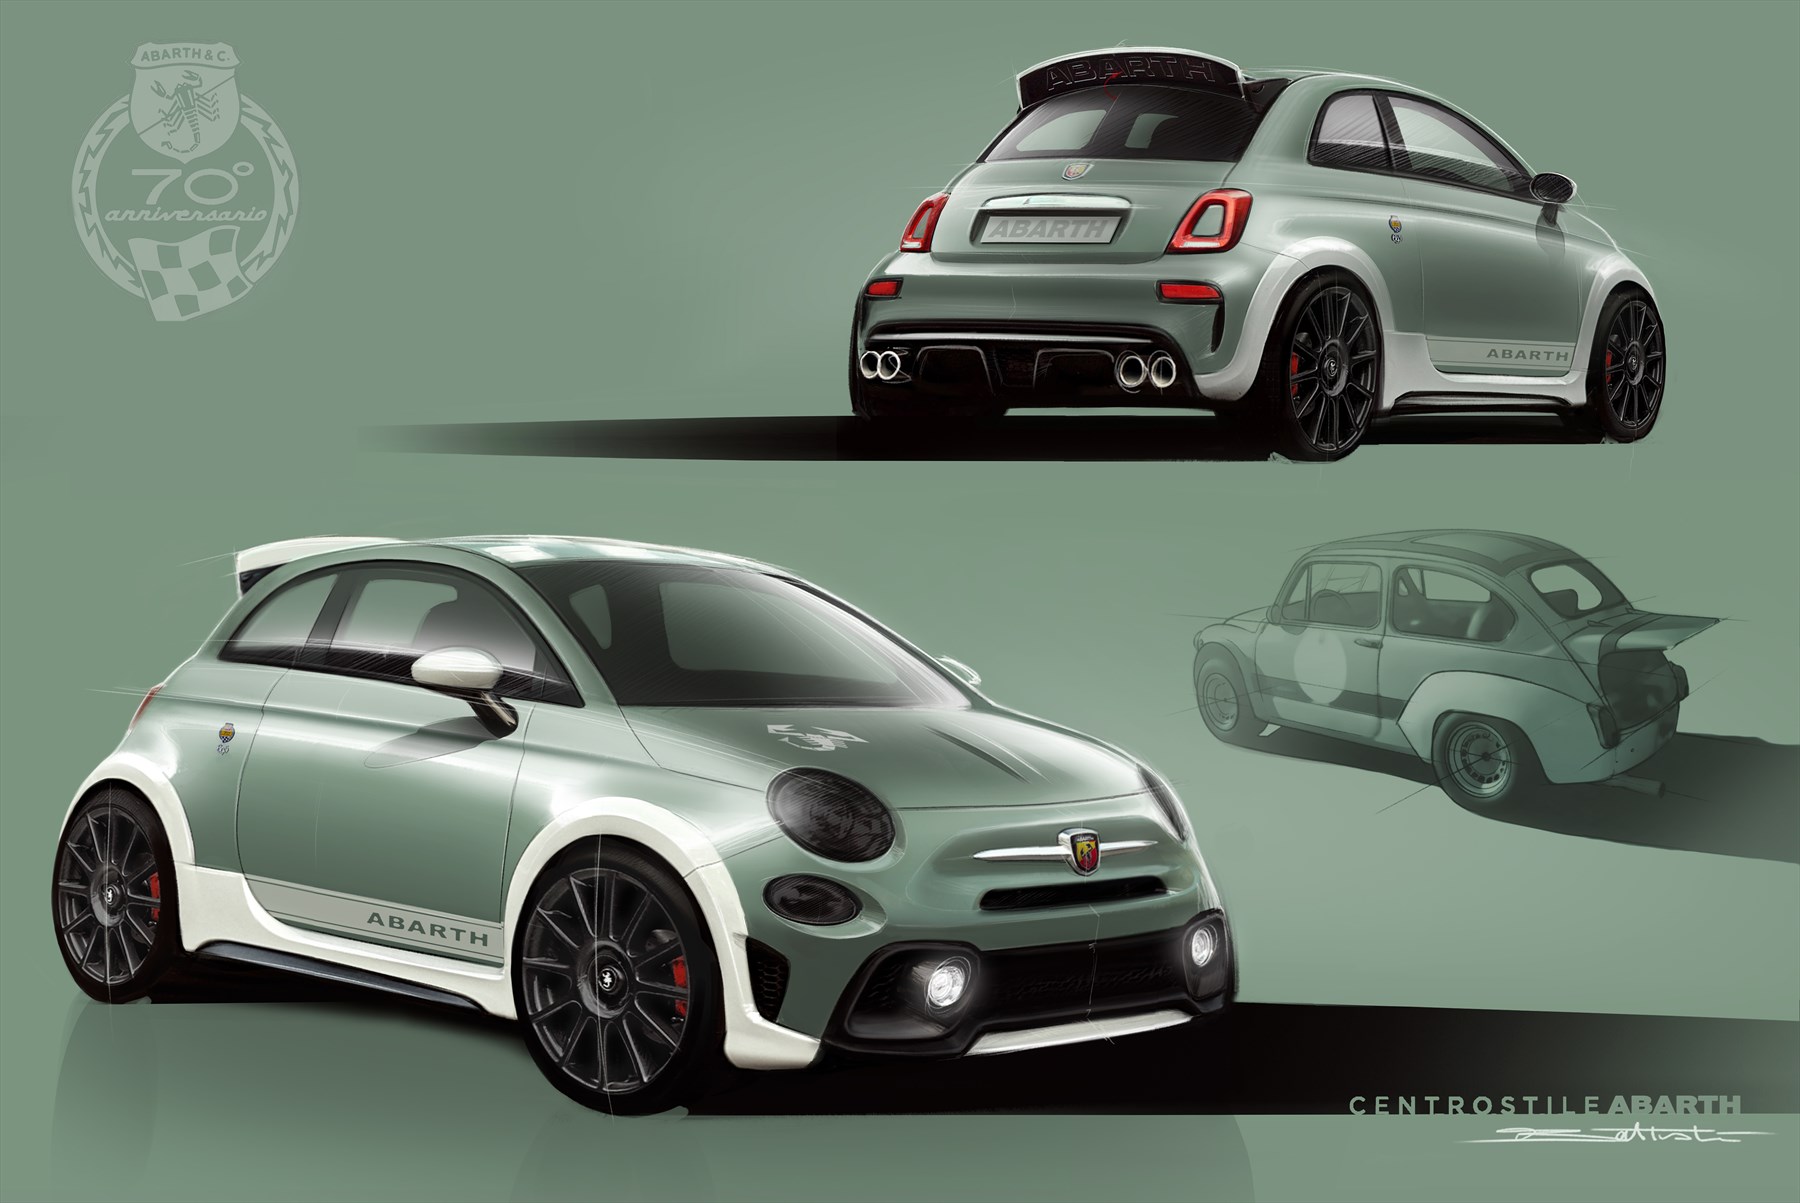 How a 100% Made by Abarth spoiler comes about